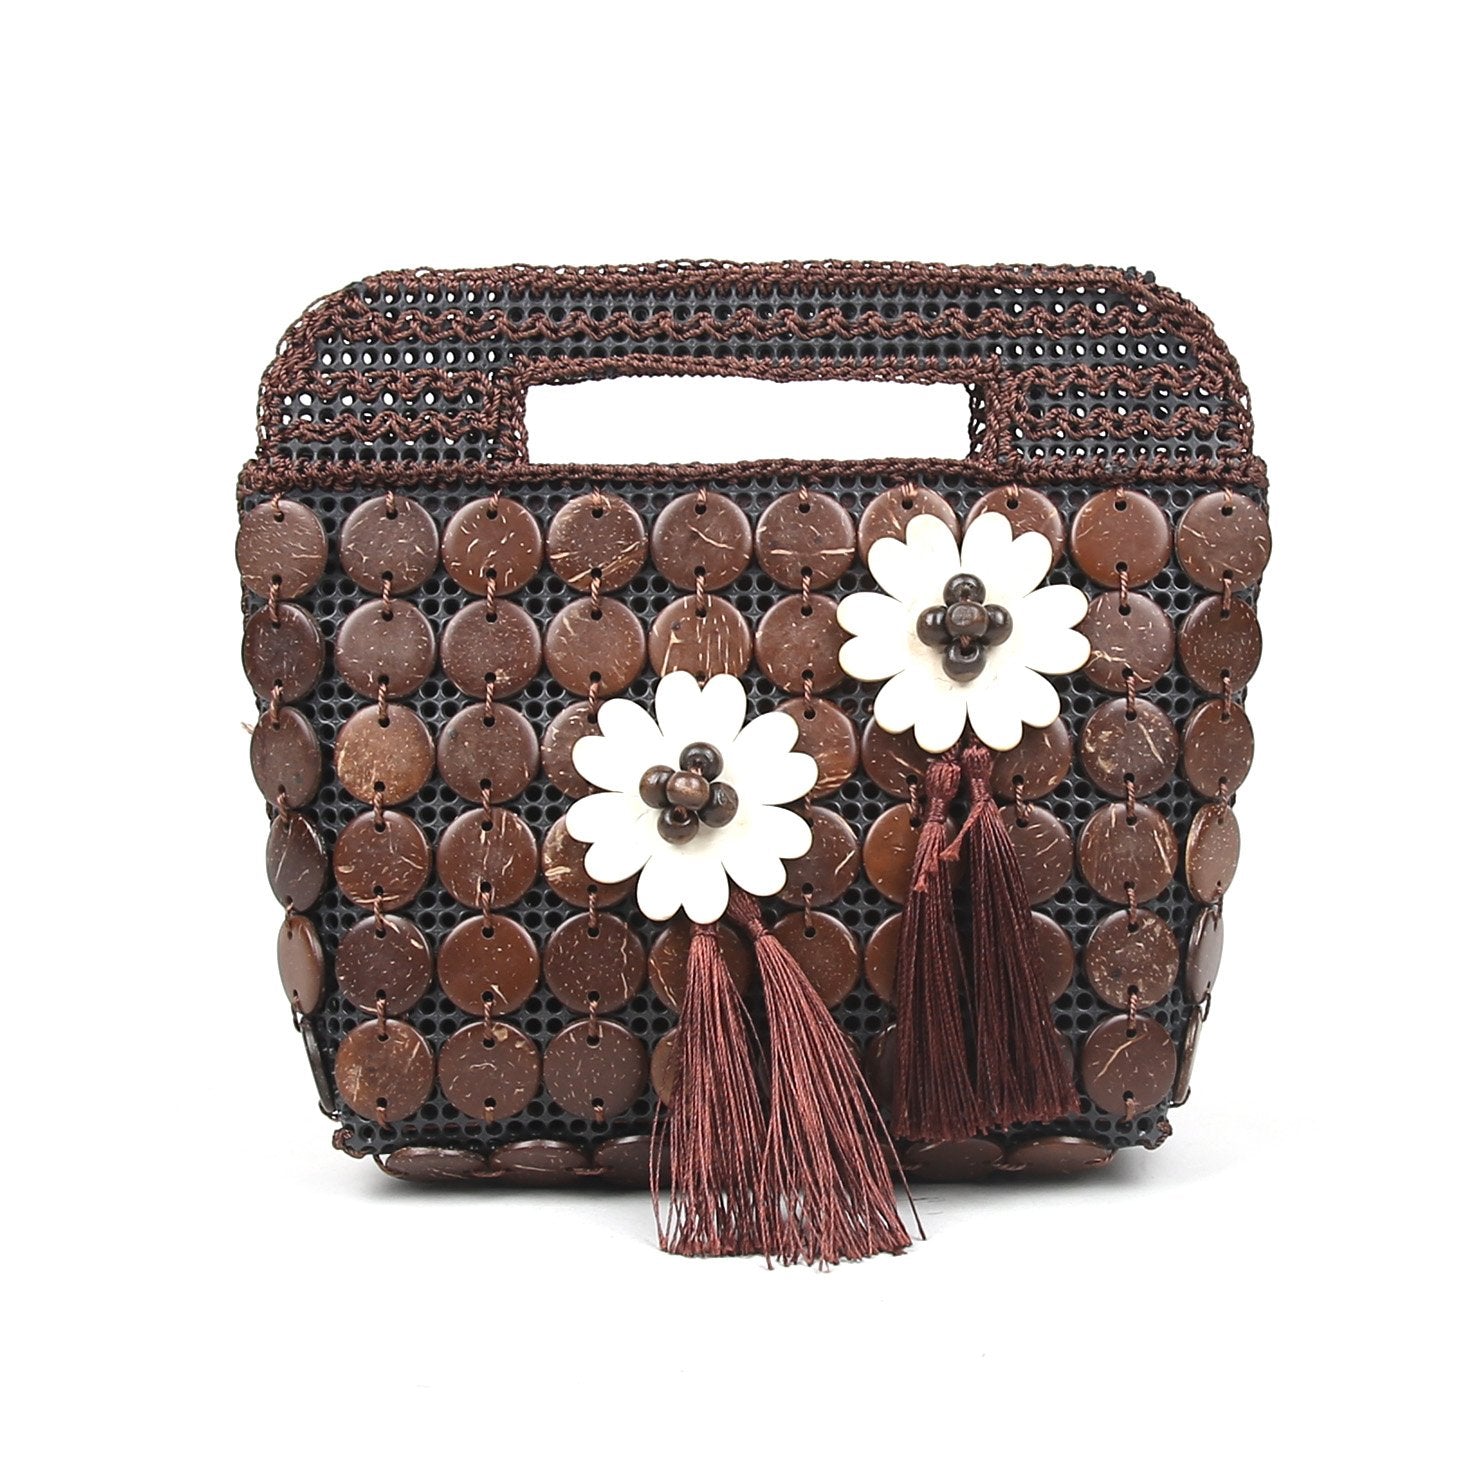 DAISYLIFE Natural and Eco-Friendly Brown Coconut Shell Clutch/Handbag/Purse with Tassels/Danglers/ Fringes 